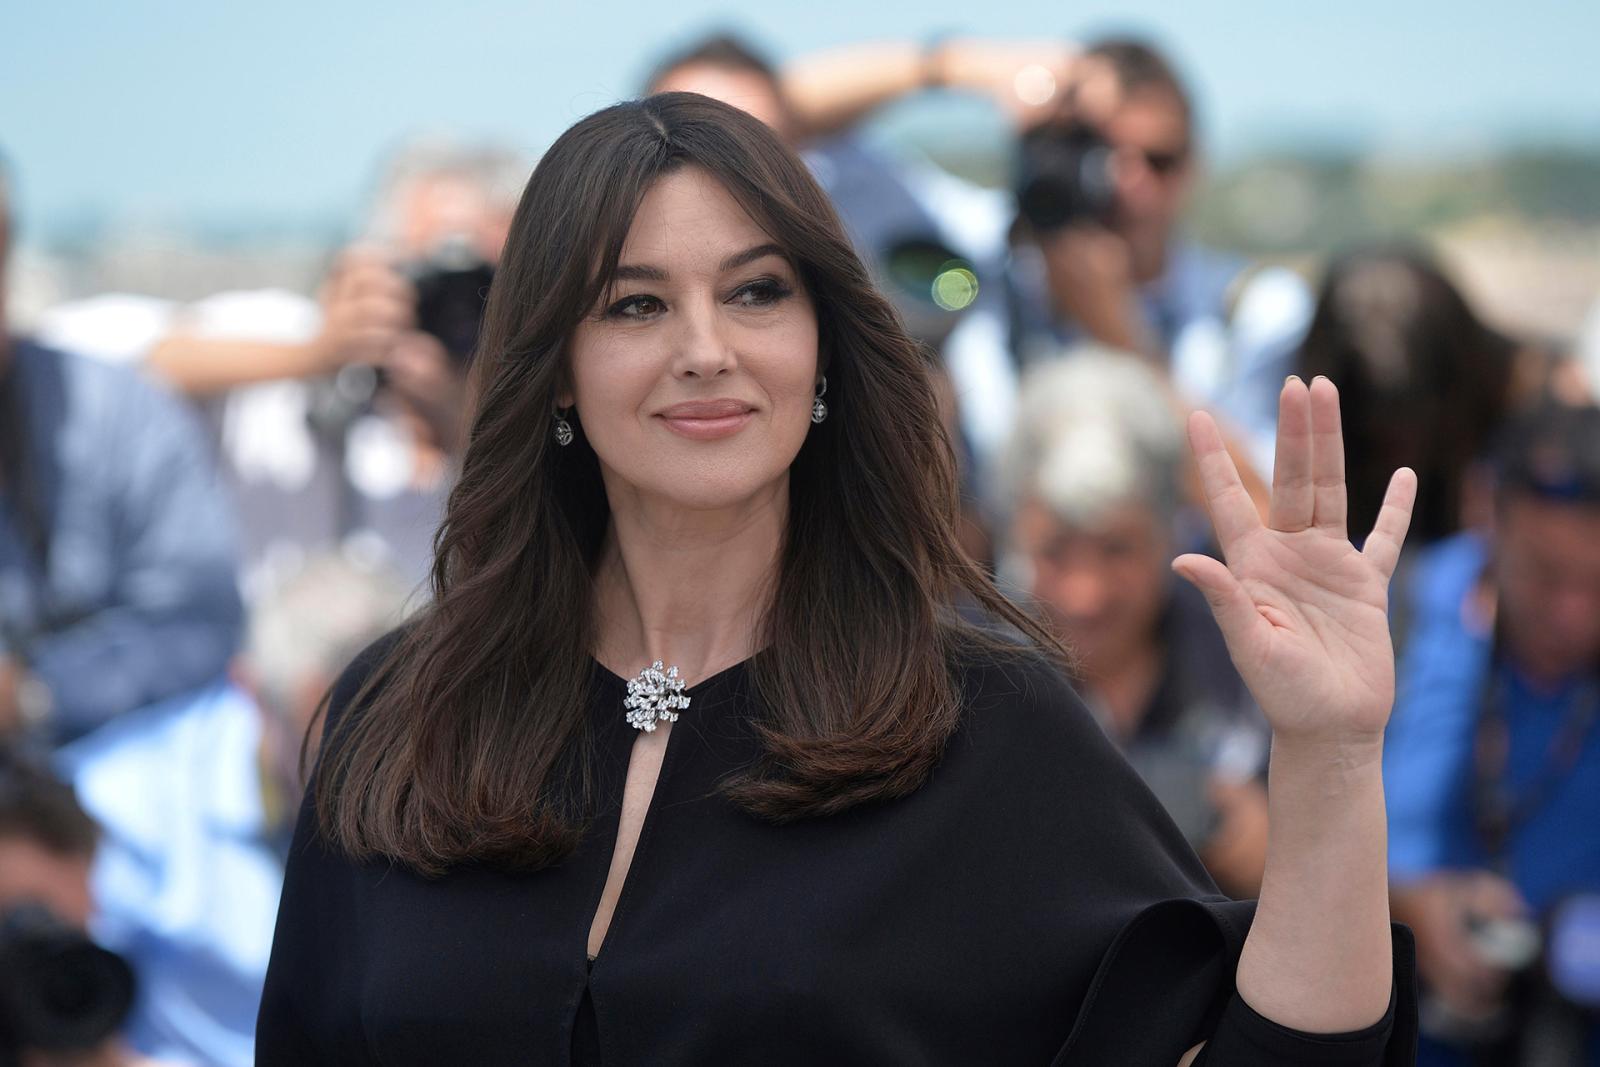 Monica Bellucci's Guide to Aging Gracefully: Eat Well, Drink Well, and Don't Take Life Too Seriously - image 3